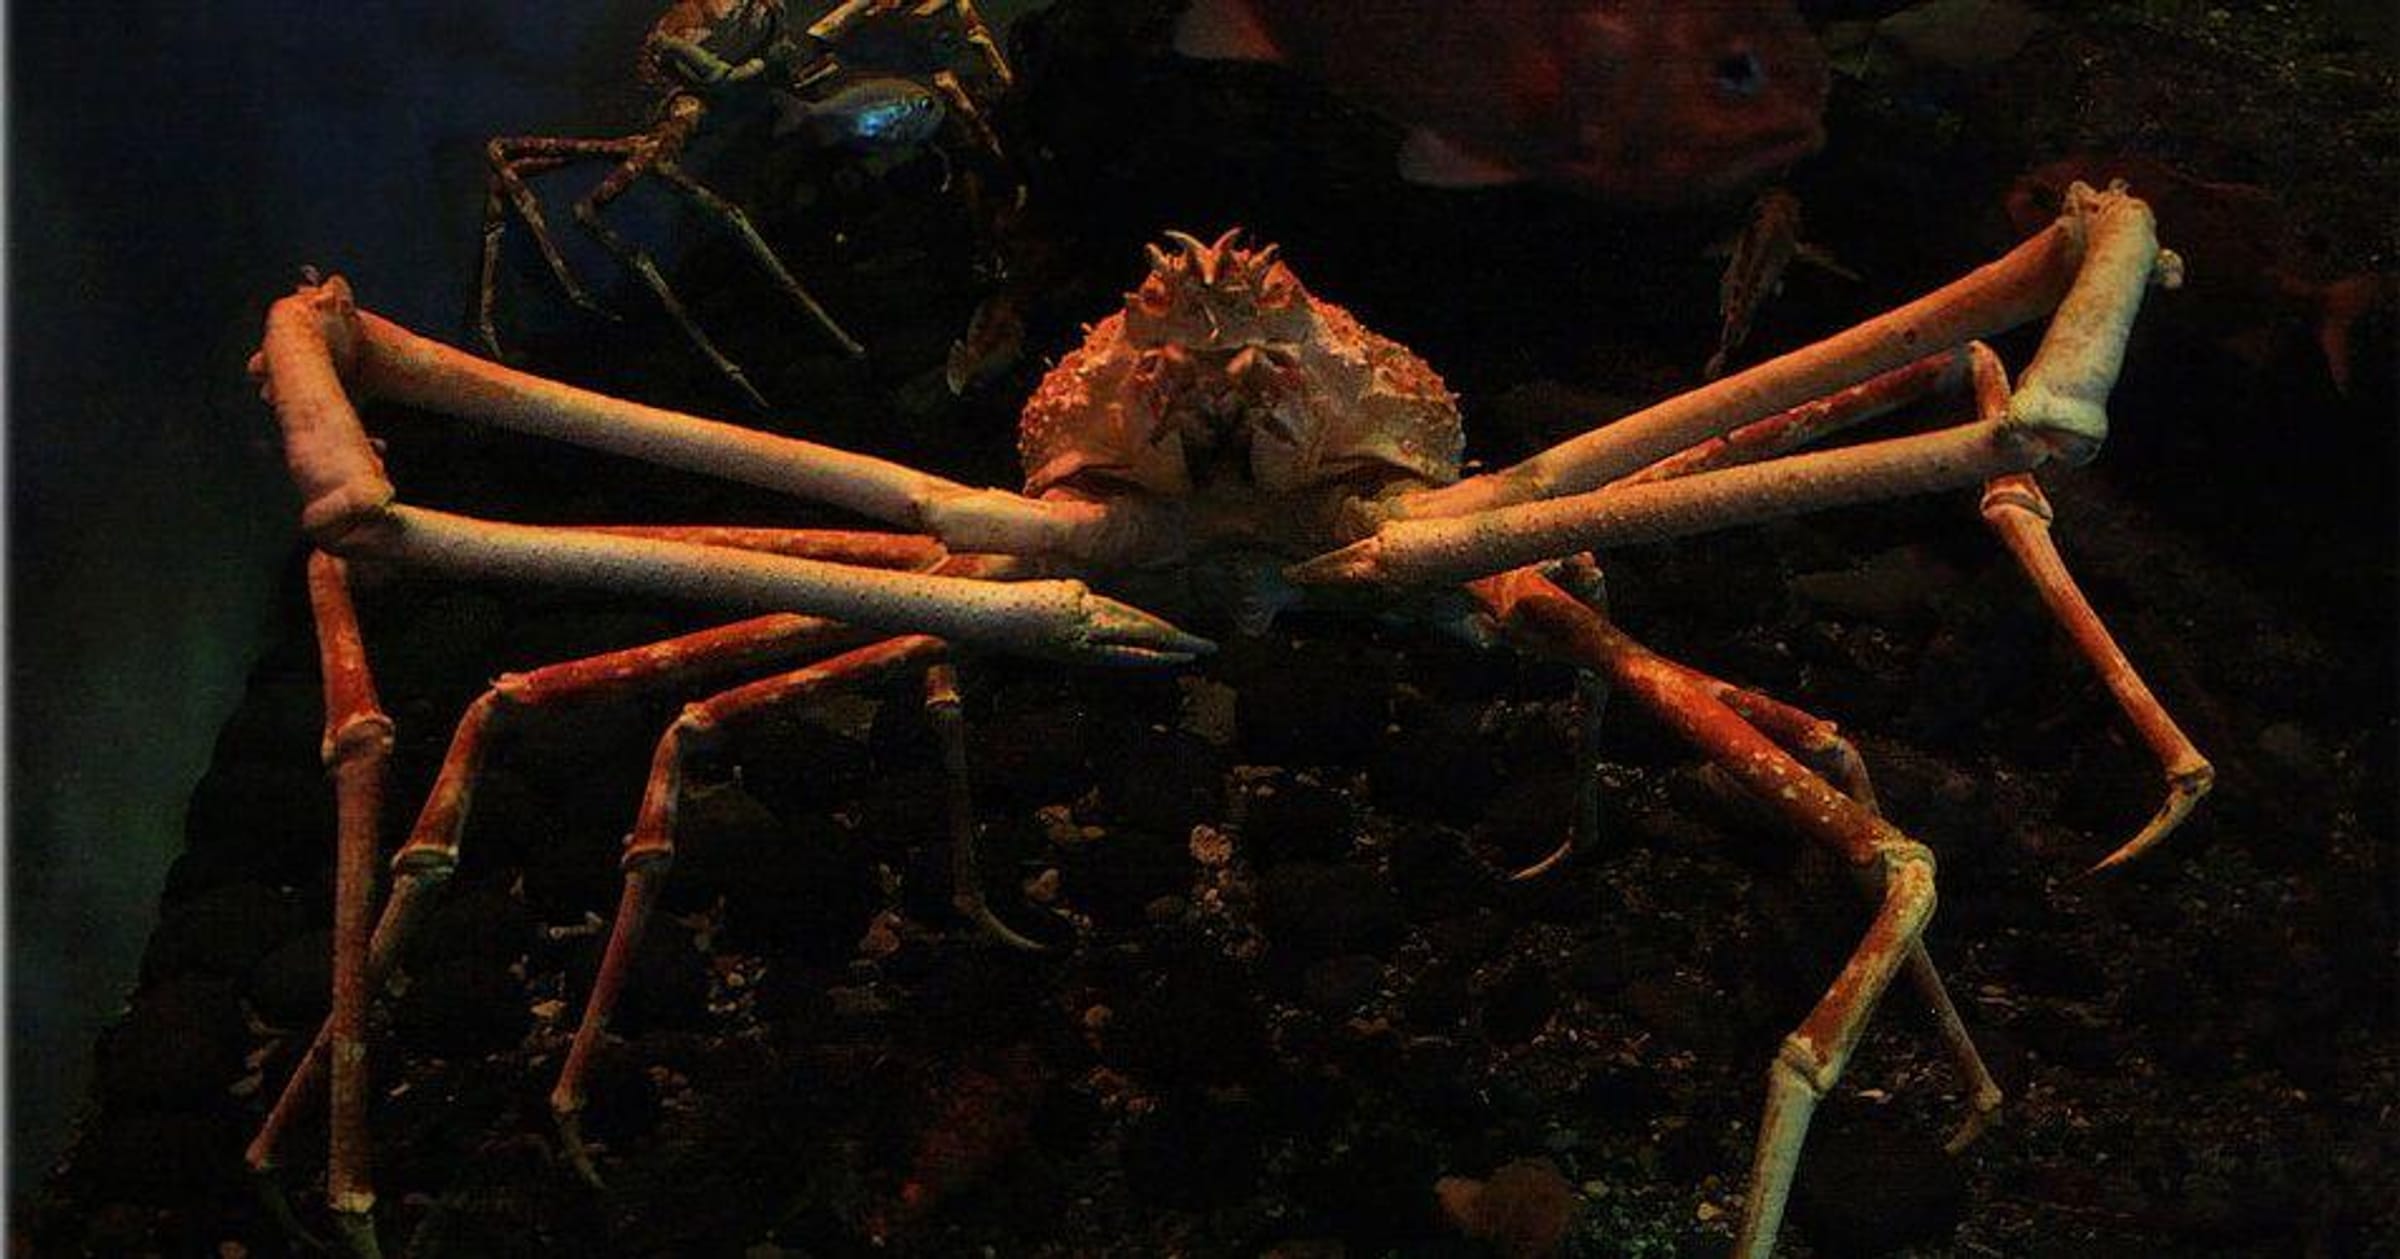 japanese spider crab compared to human